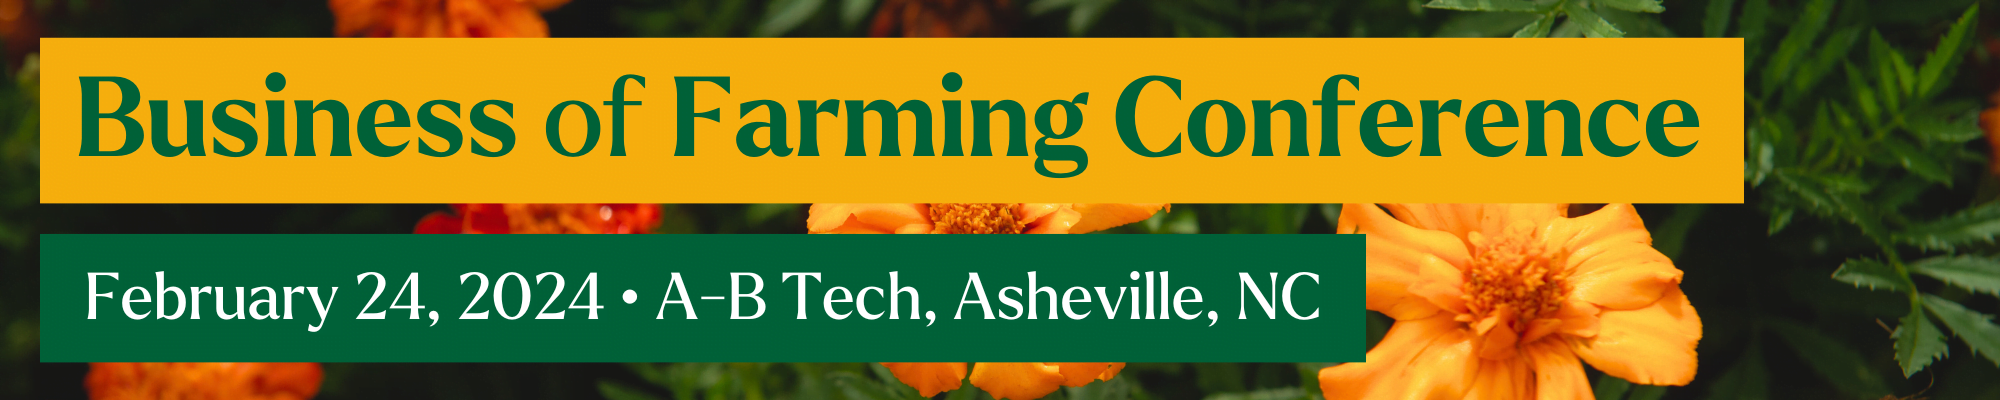 ASAP's Business of Farming Conference, Feb. 24, 2024, at A-B Tech in Asheville, NC